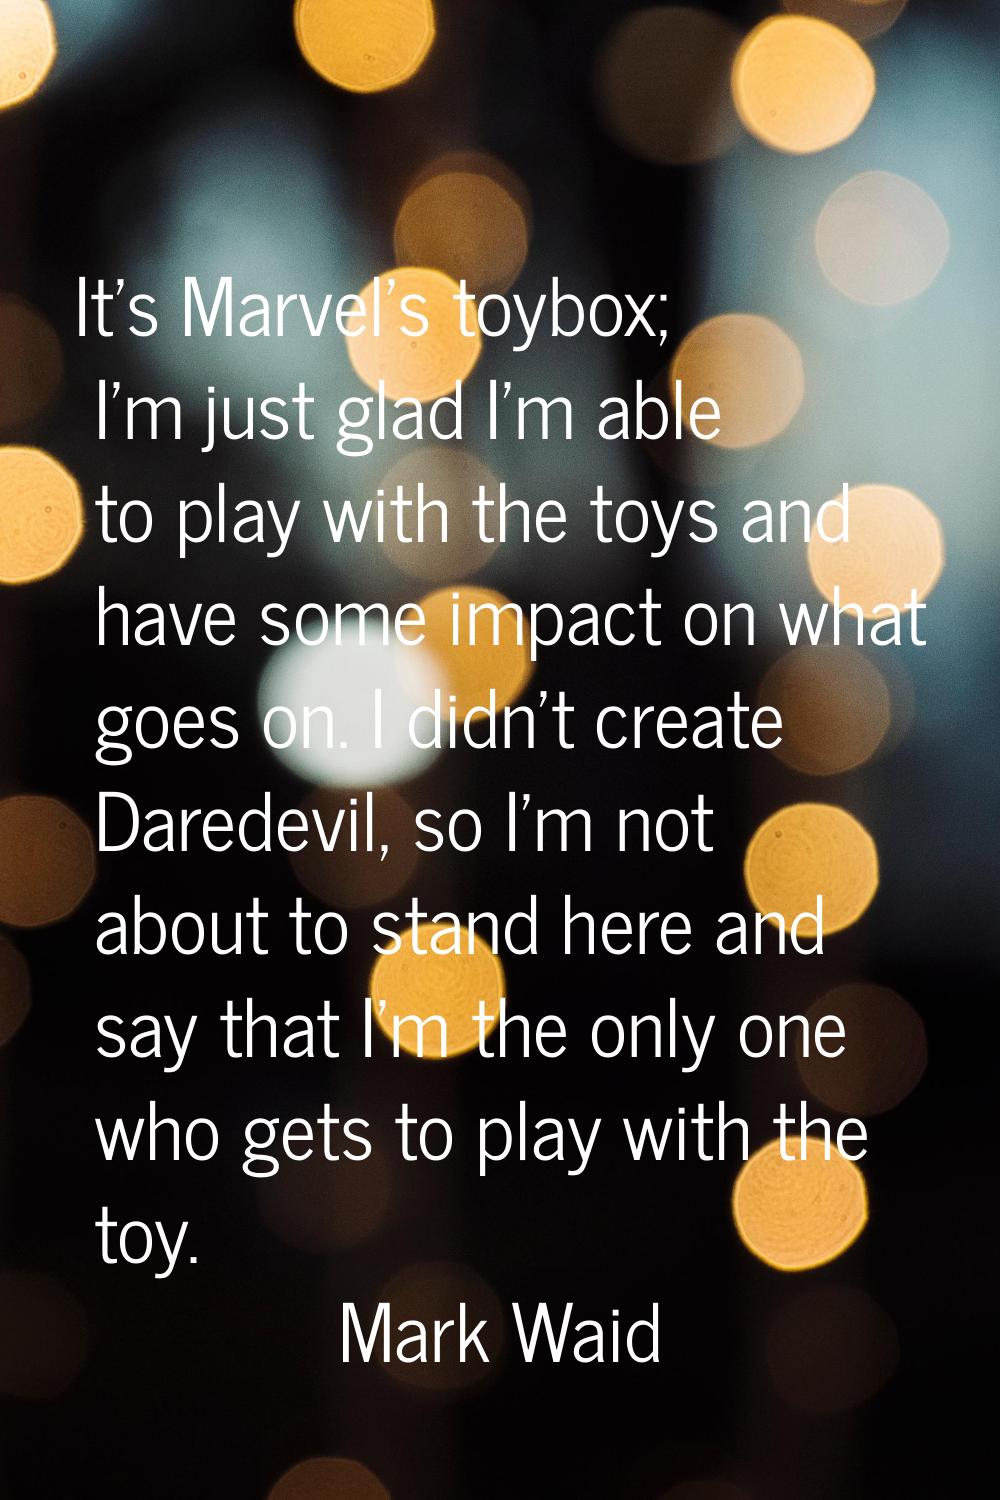 It's Marvel's toybox; I'm just glad I'm able to play with the toys and have some impact on what goe